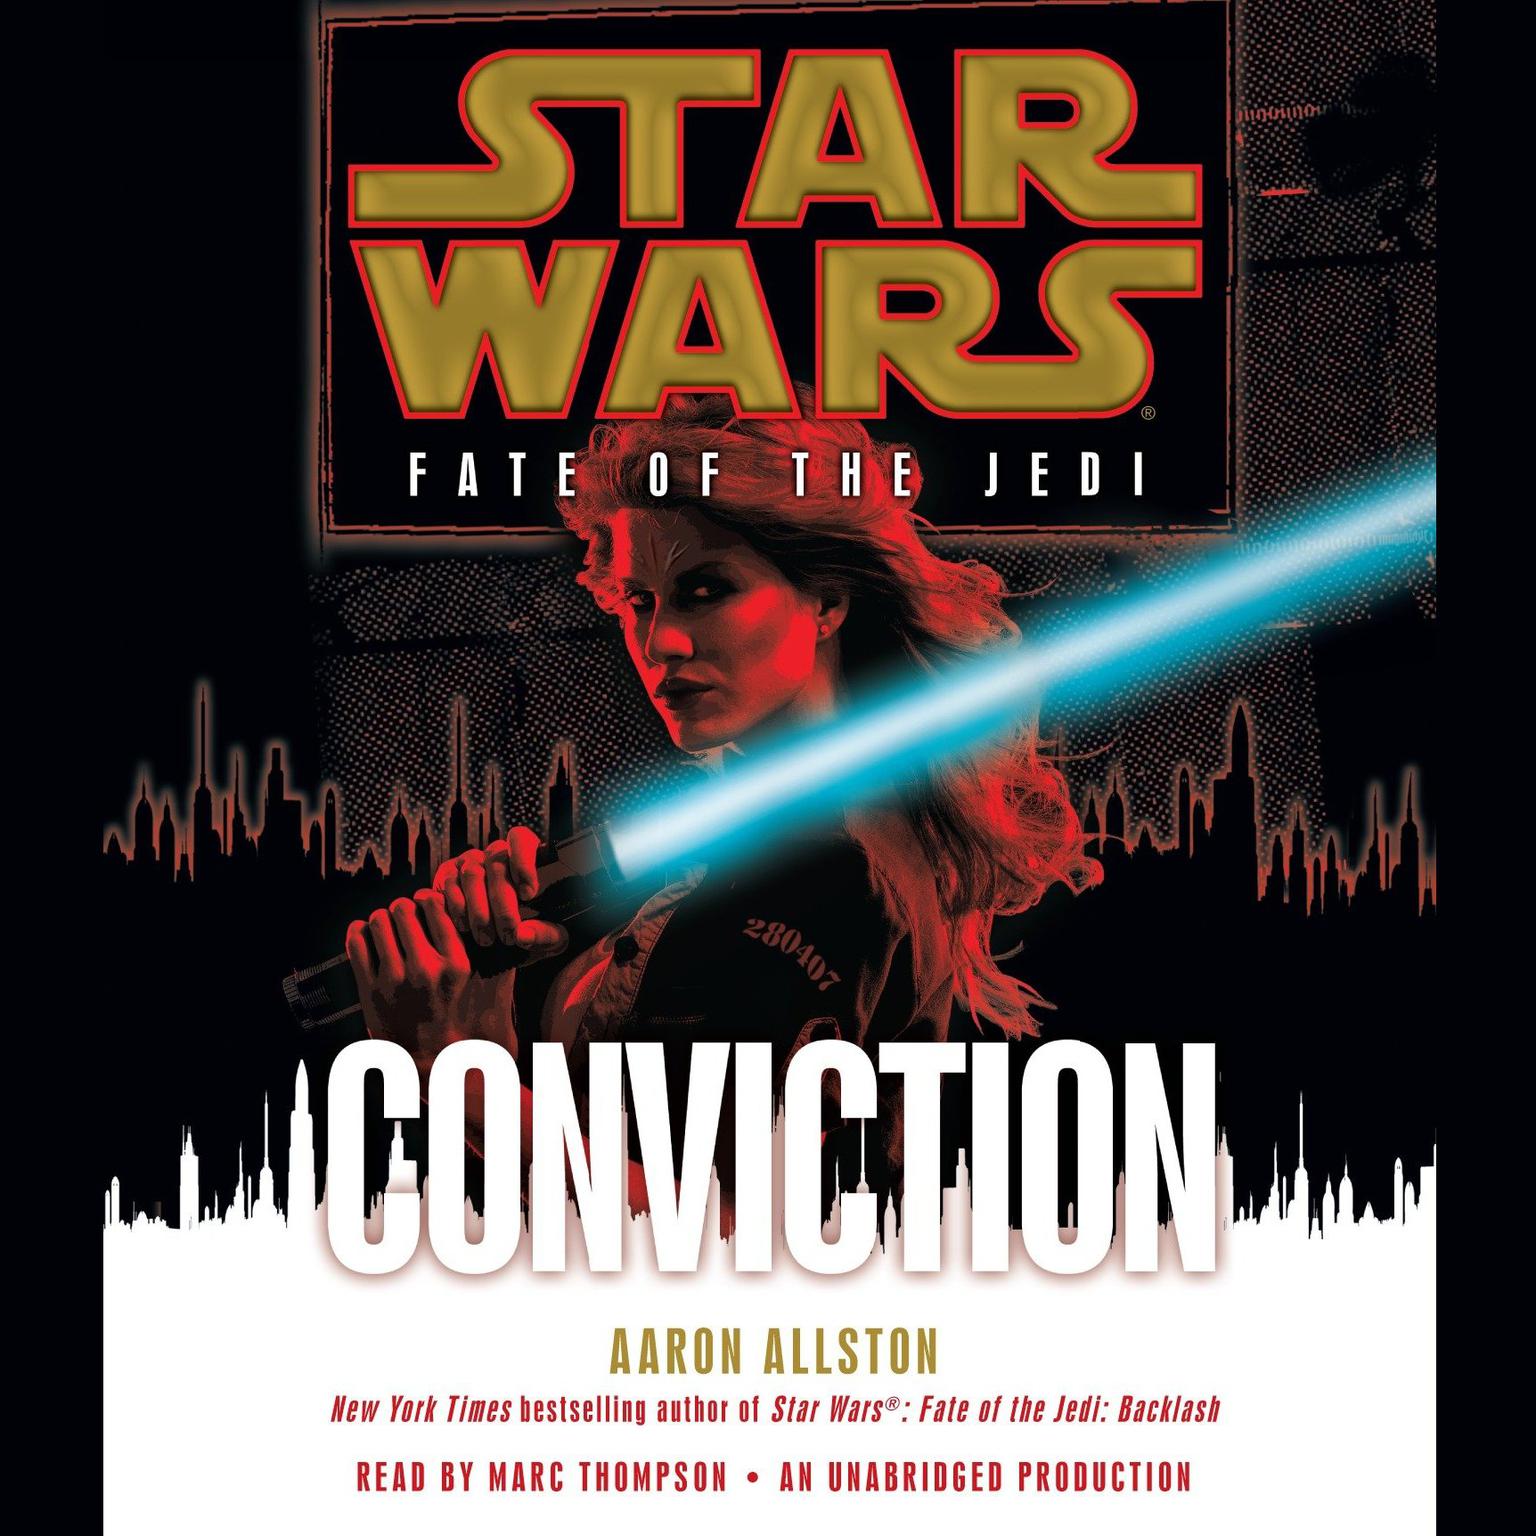 Conviction: Star Wars (Fate of the Jedi) Audiobook, by Aaron Allston